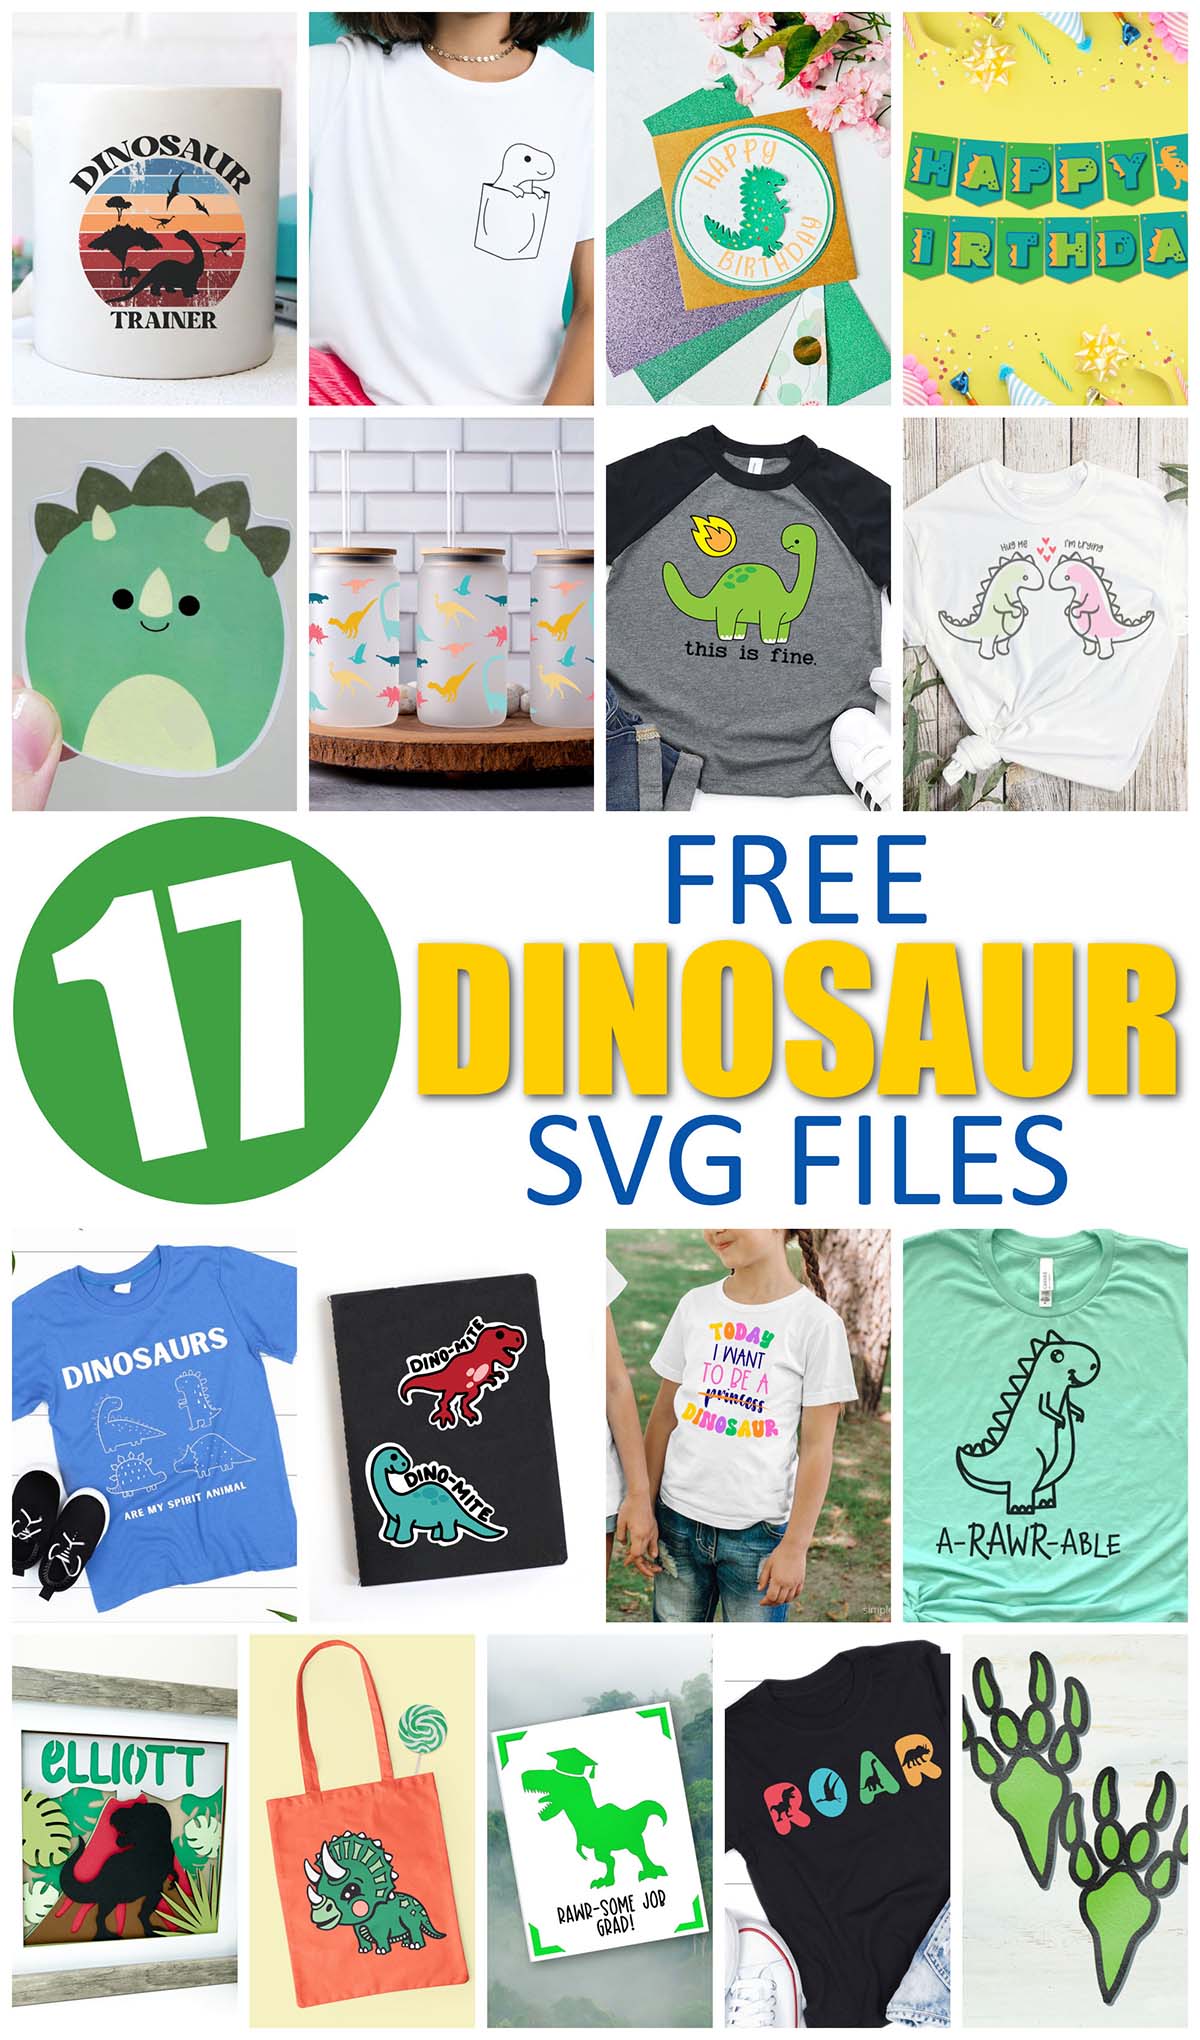 17 Free Dinosaur Files for Cricut and Silhouette